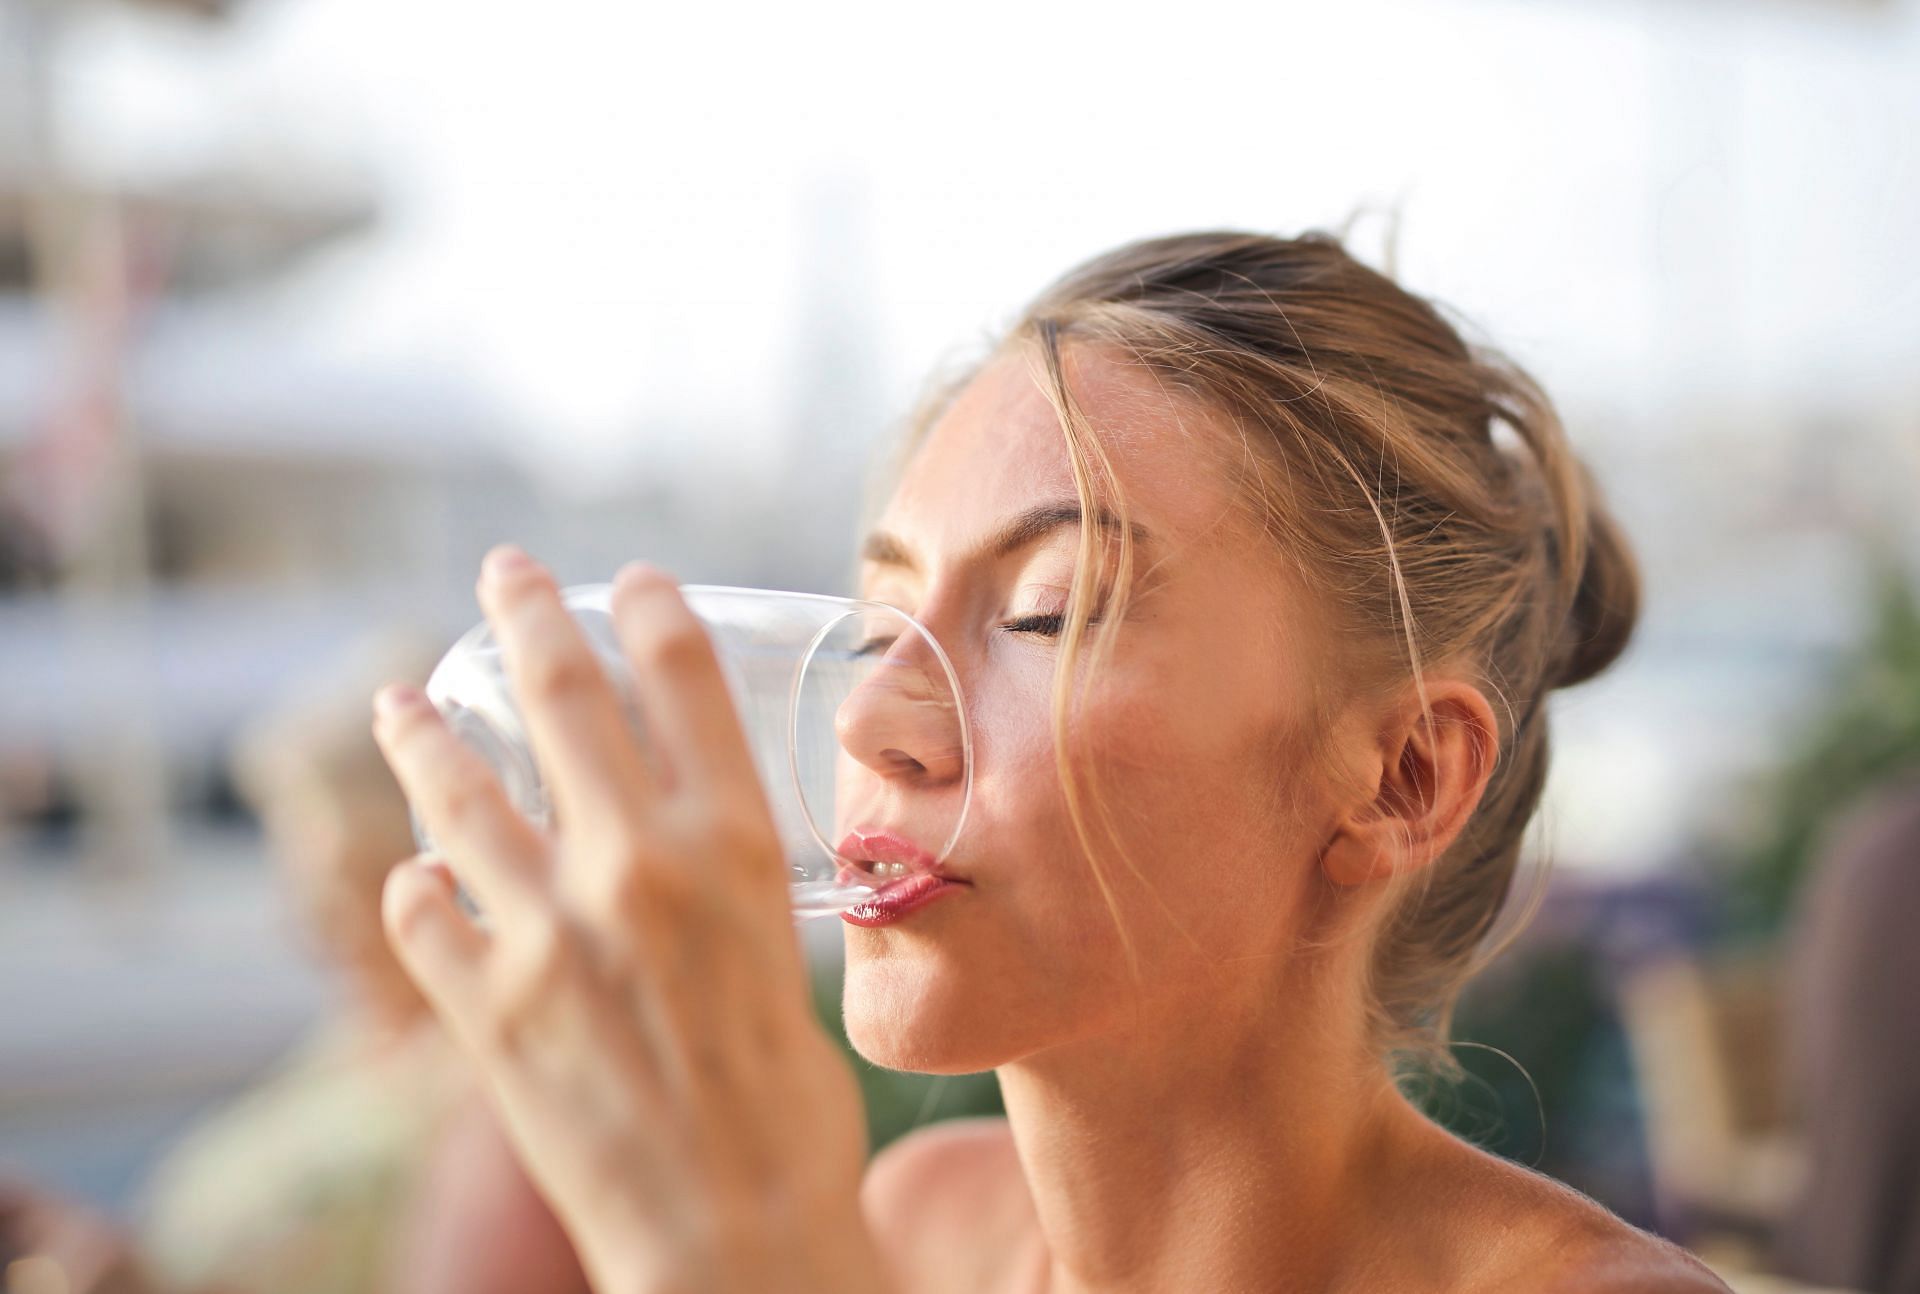 Staying hydrated is important for people suffering from IBS- M. (Image via Pexels/ Adrienn)